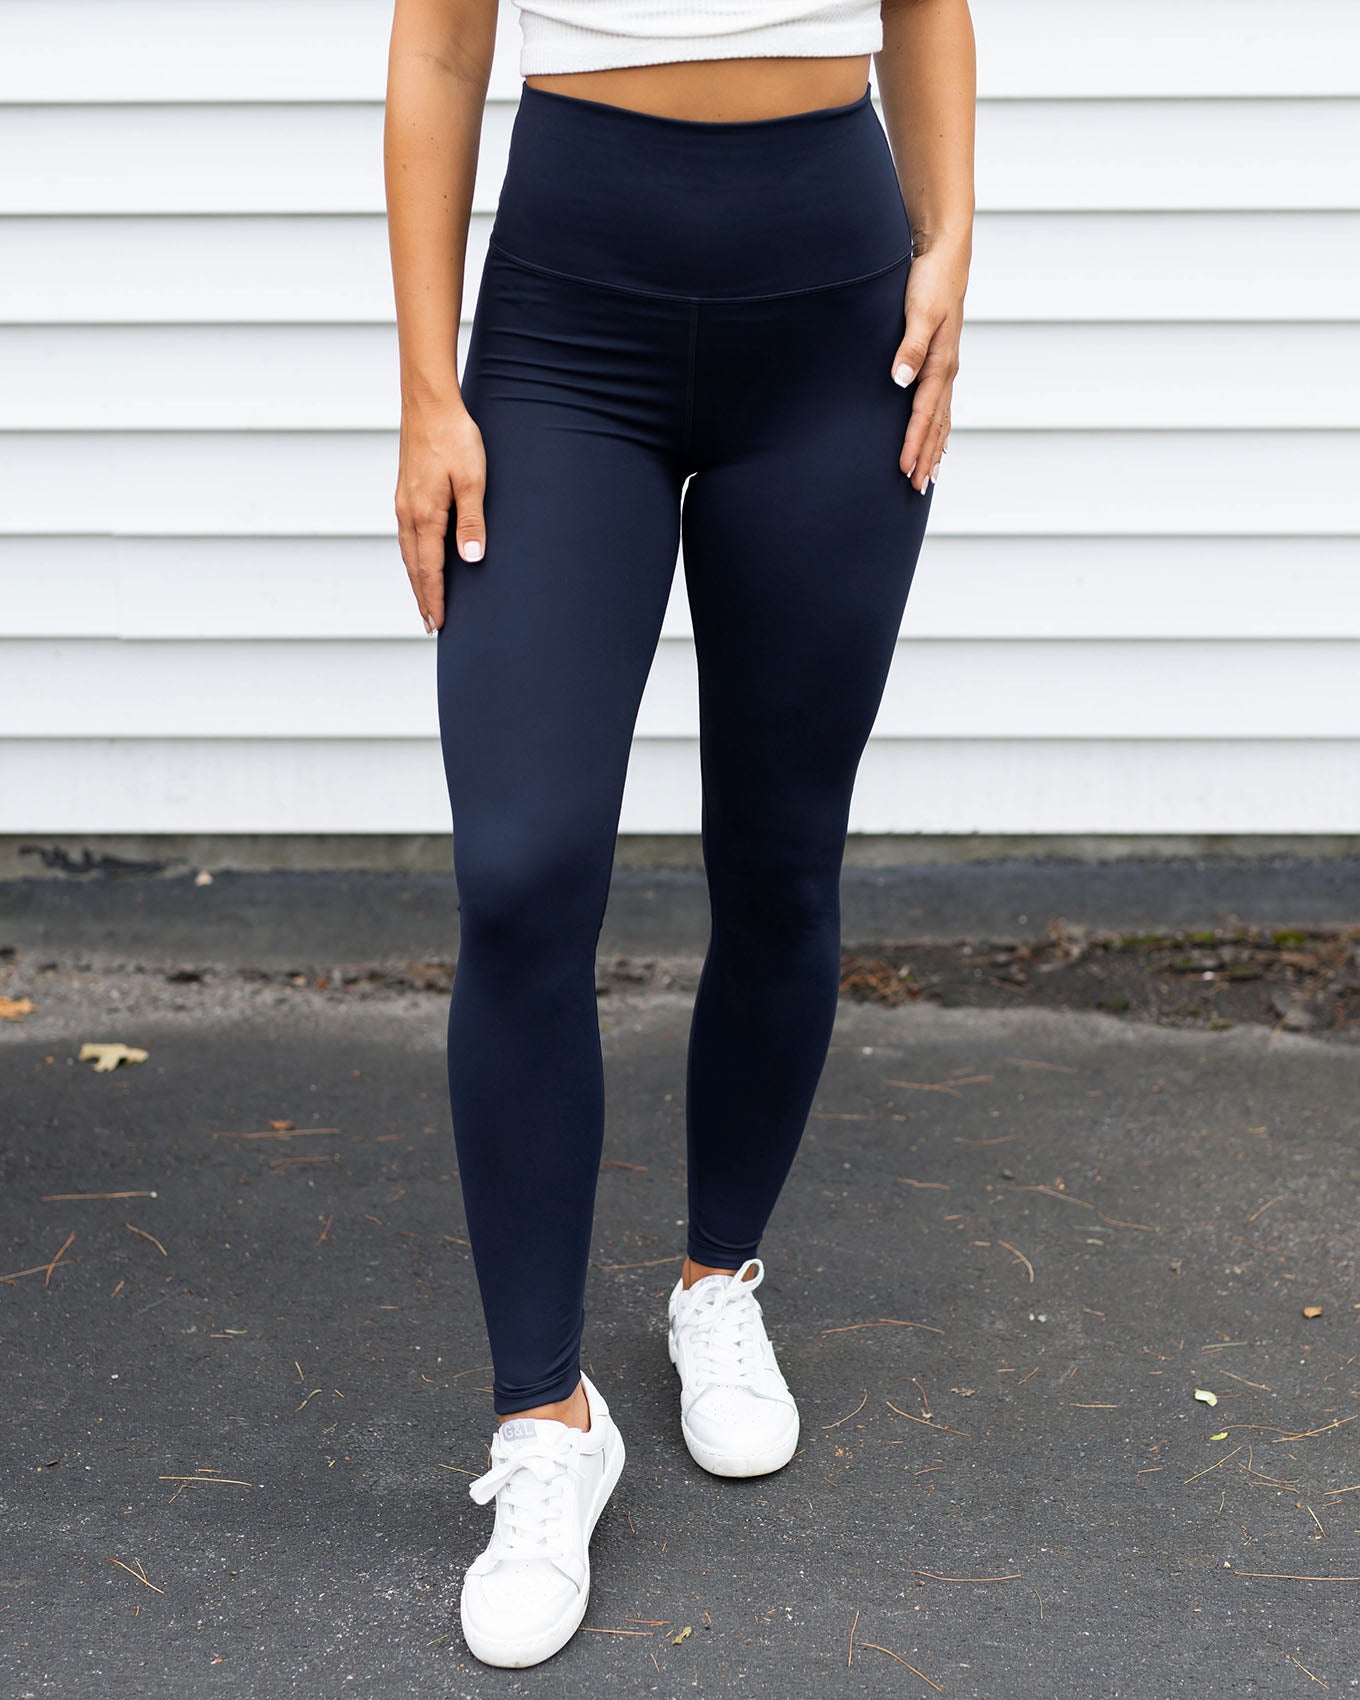 Cotton Spandex Stylish Legging With Lace At Bottom Color Navy Blue